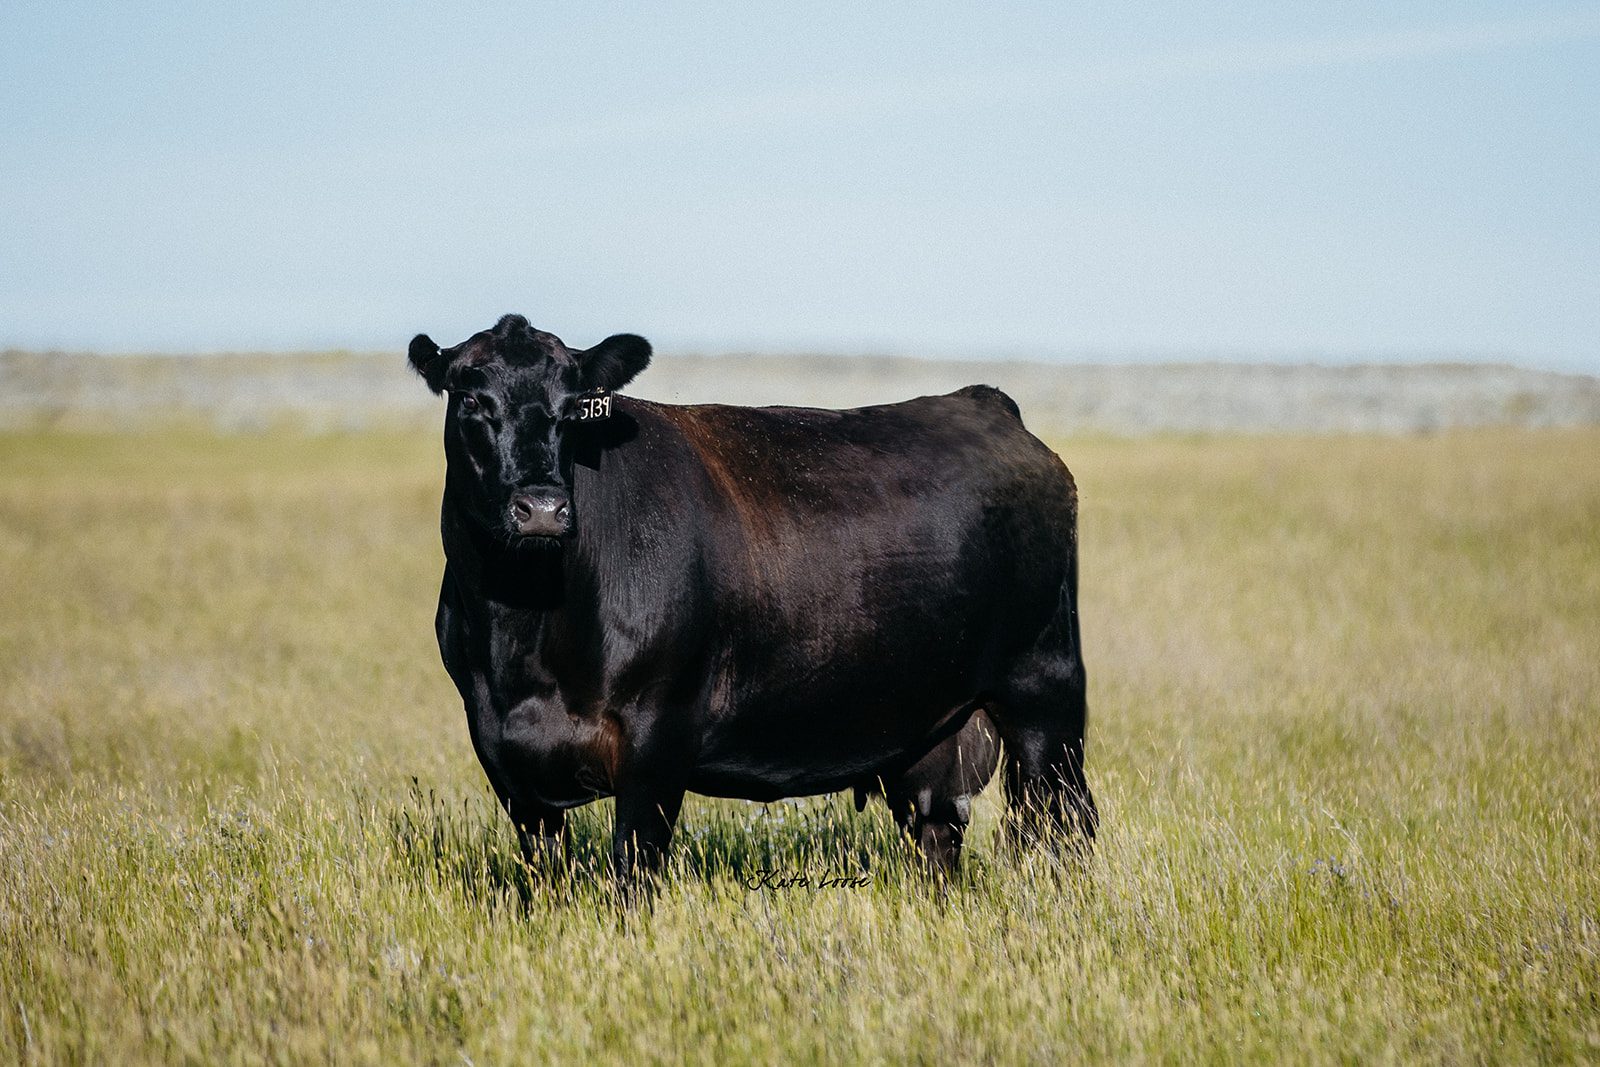 Cow on grass in Montana